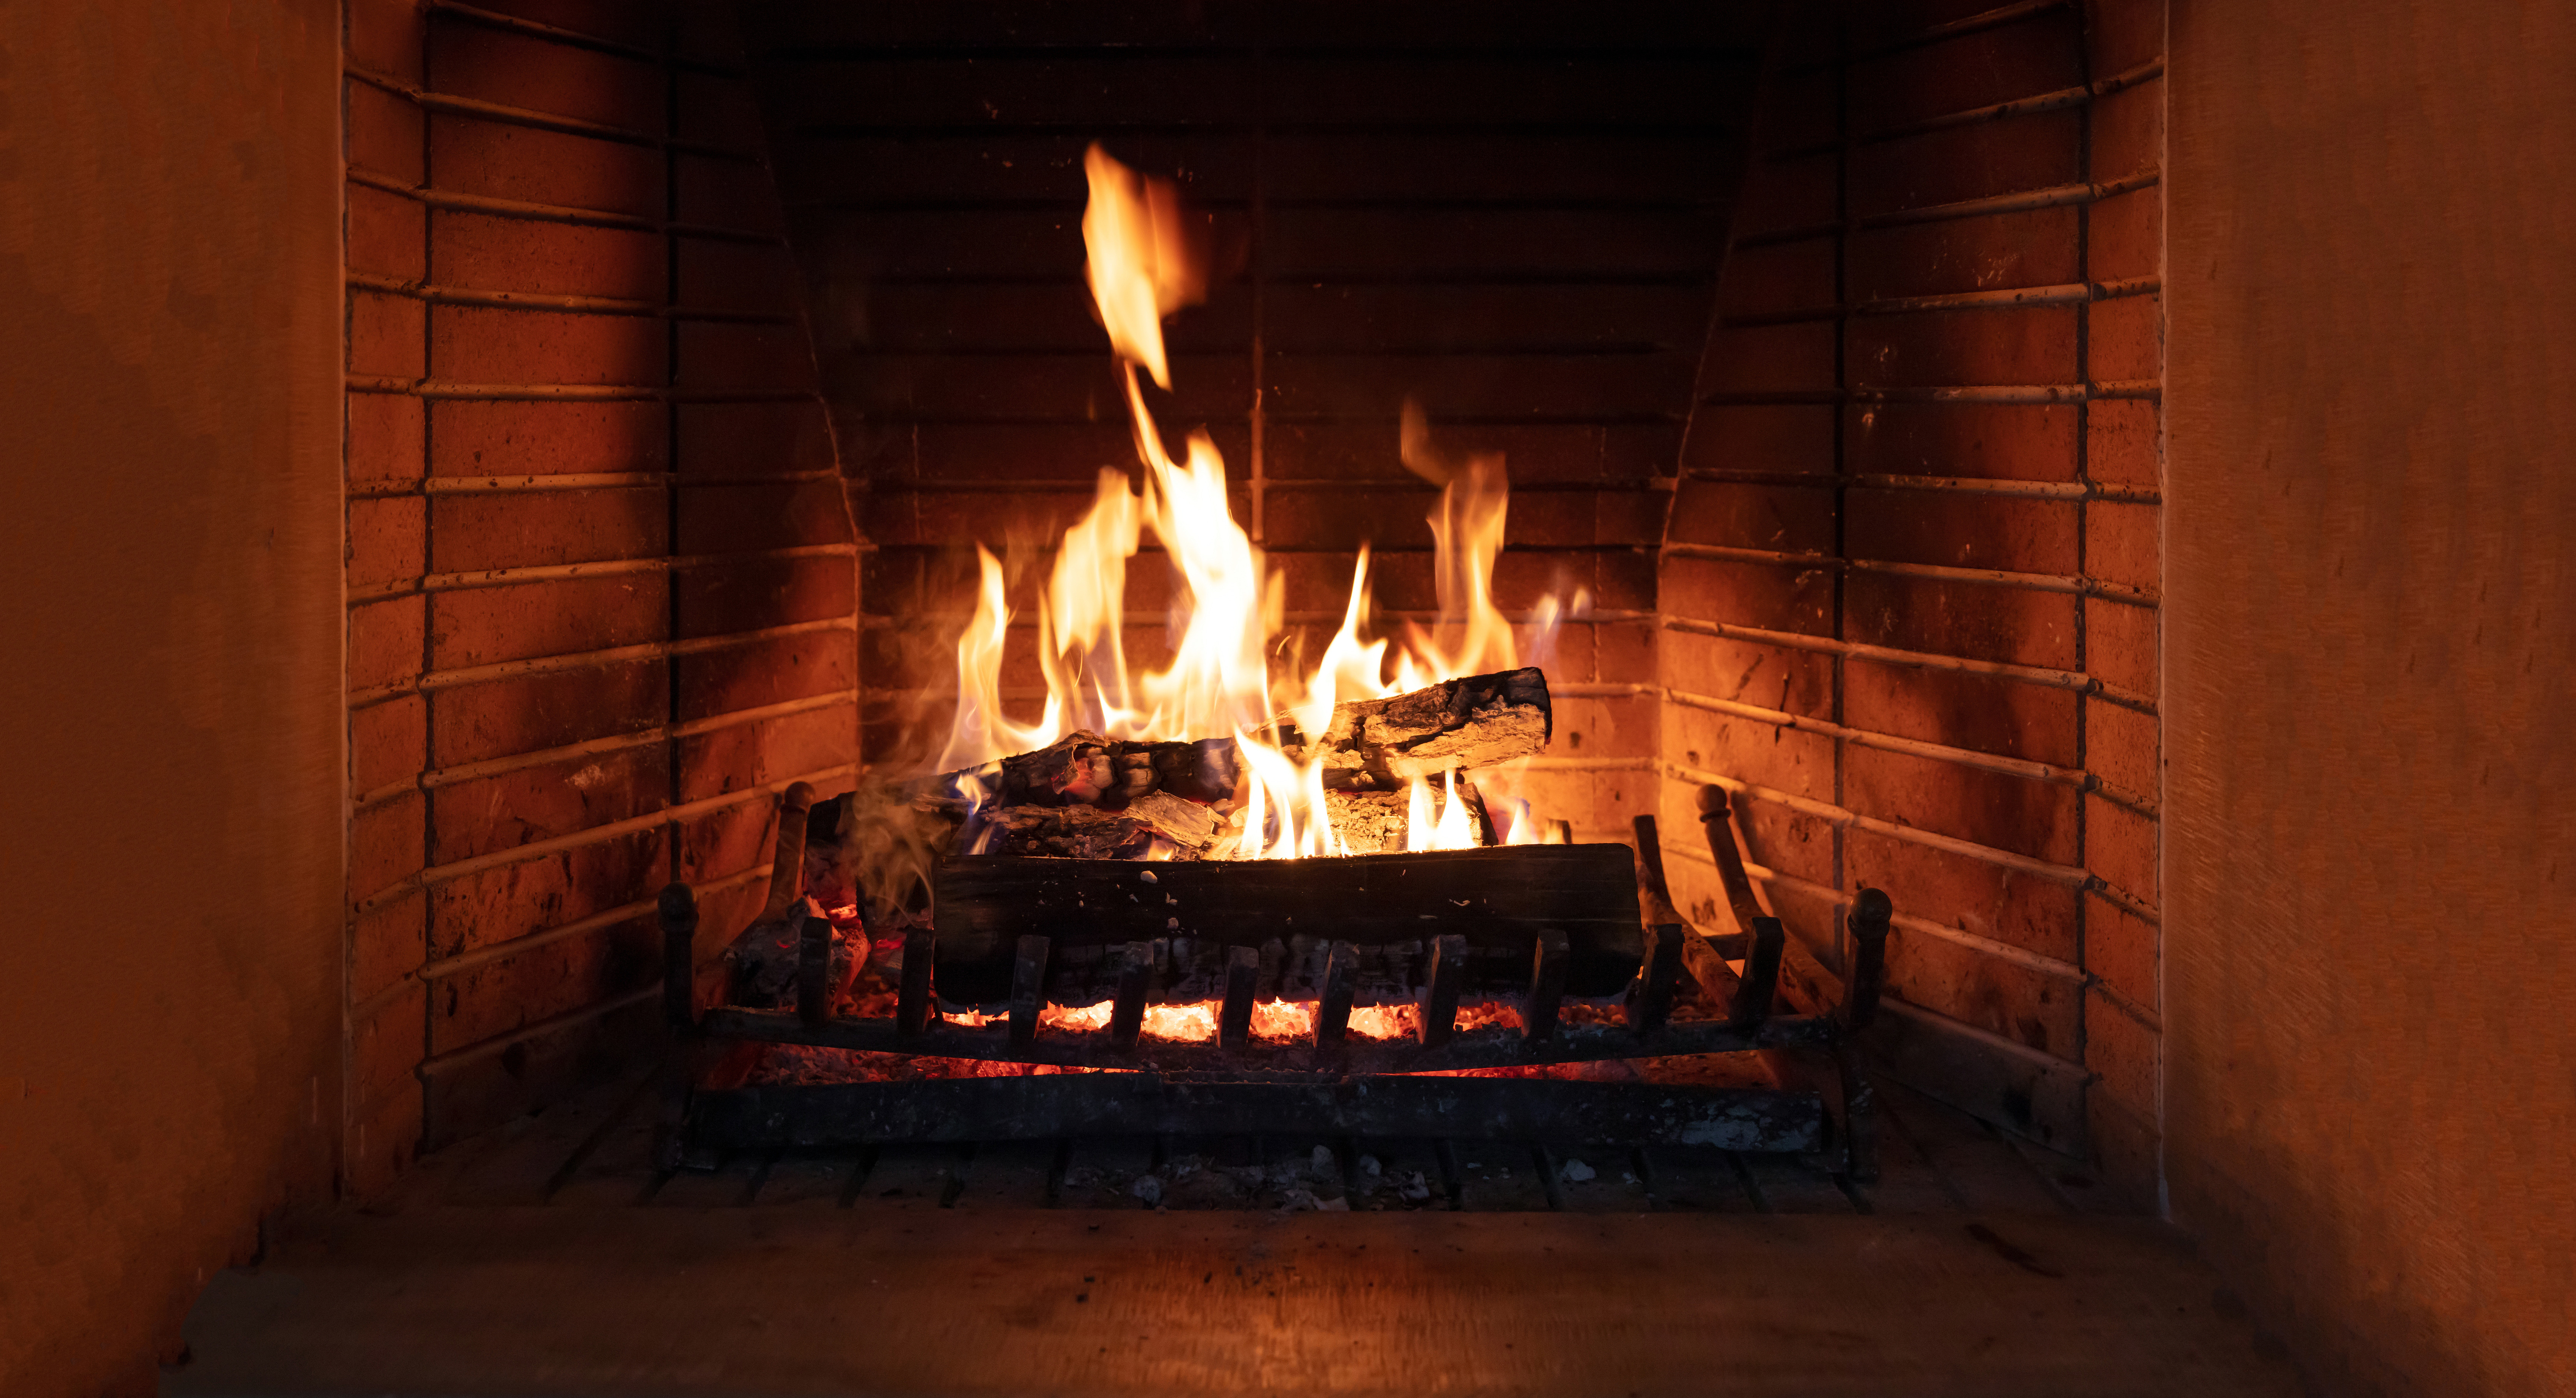 Logs in open fire place, large fire burning